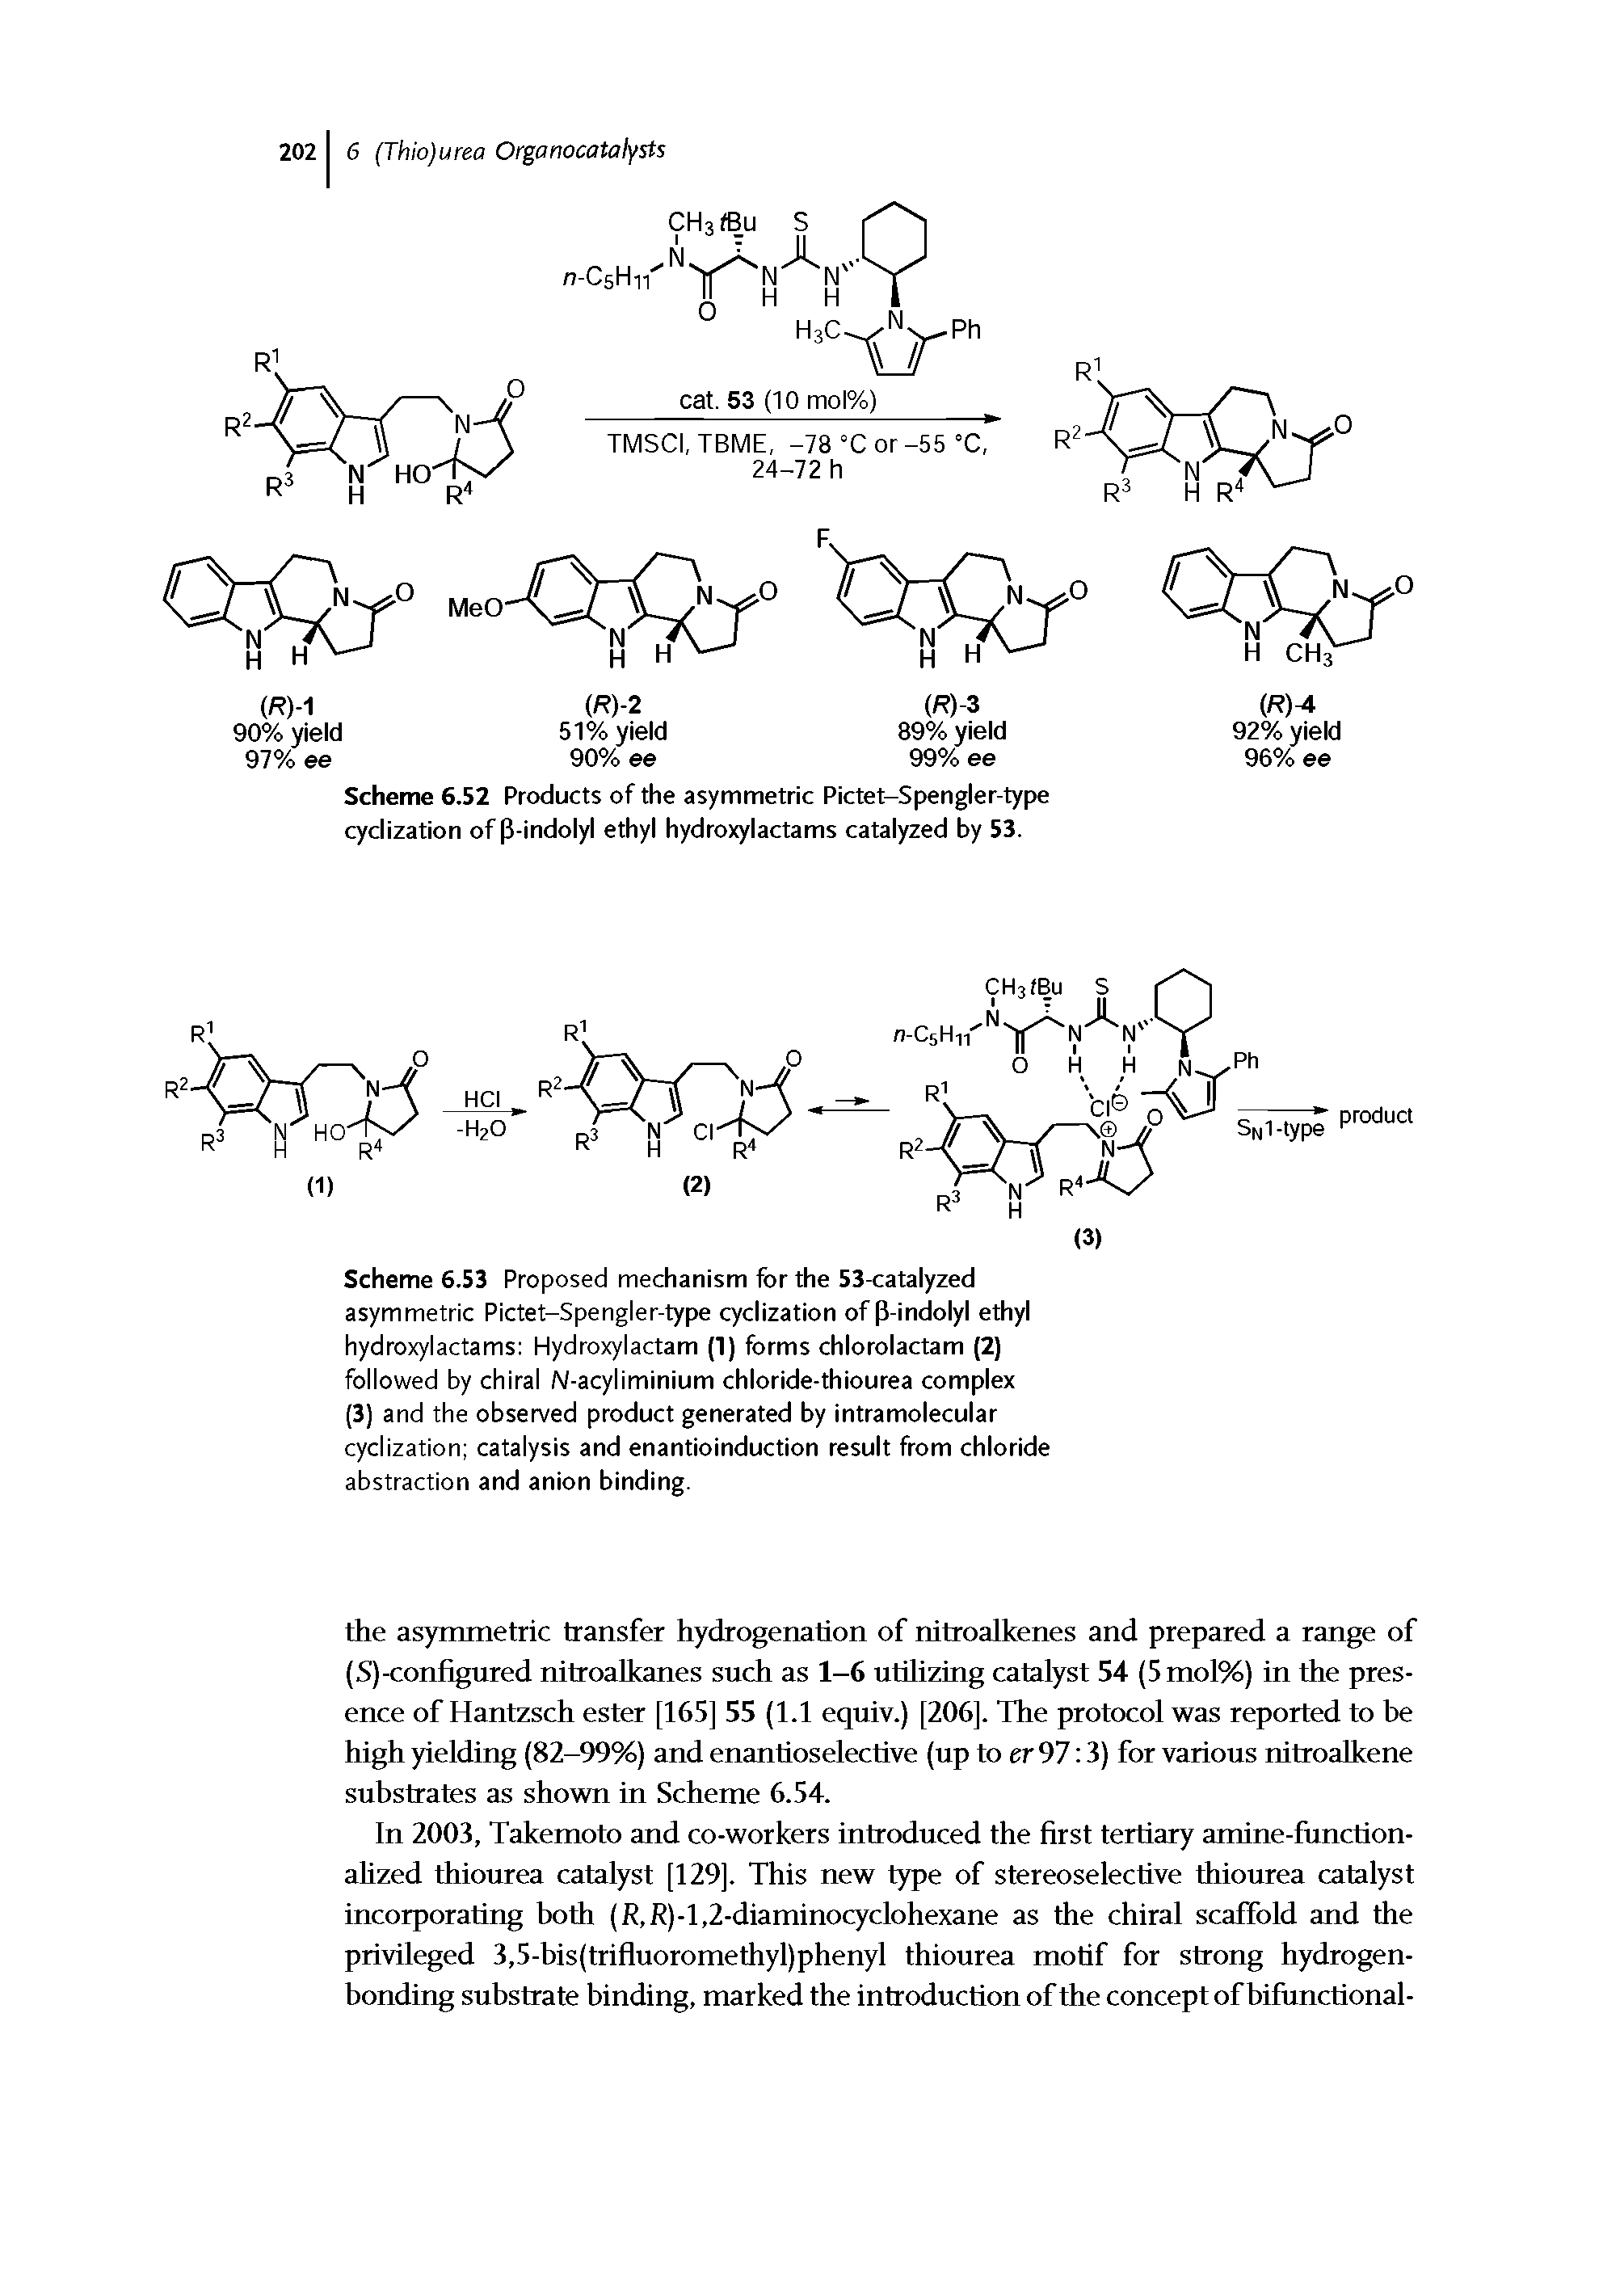 Scheme 6.52 Products of the asymmetric Pictet-Spengler-type cyclization of p-indolyl ethyl hydroxylactams catalyzed by 53.